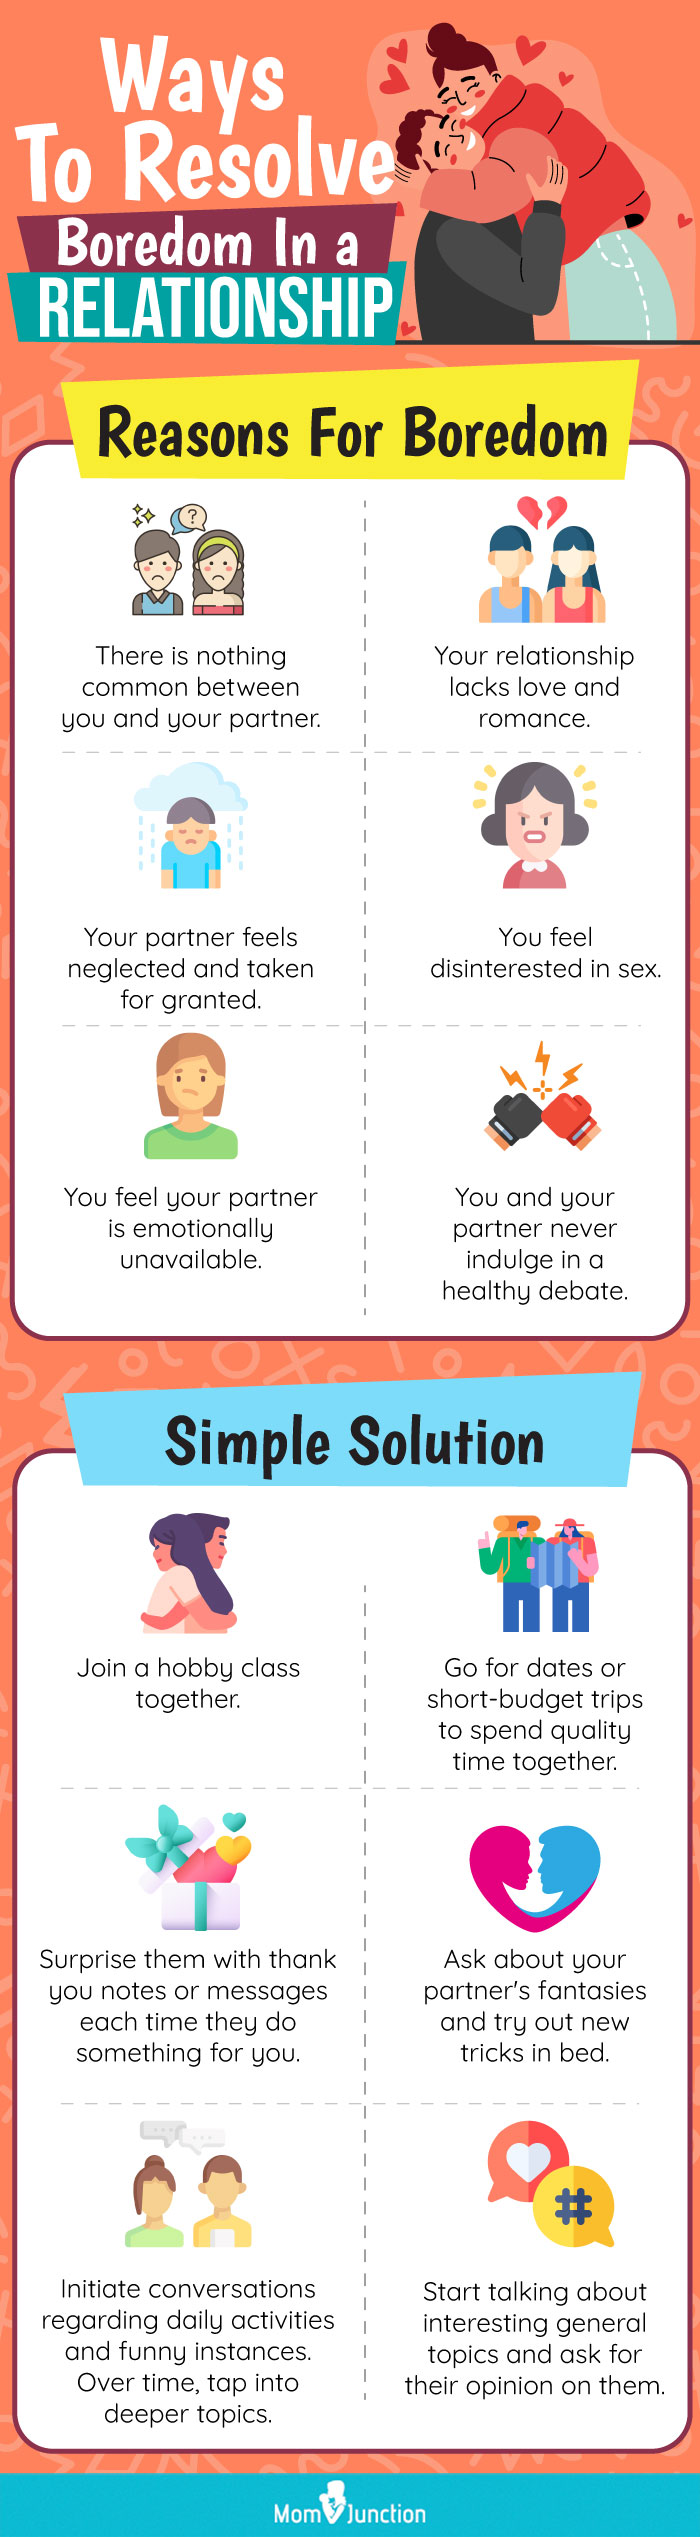 ways to resolve boredom in a relationship (infographic)